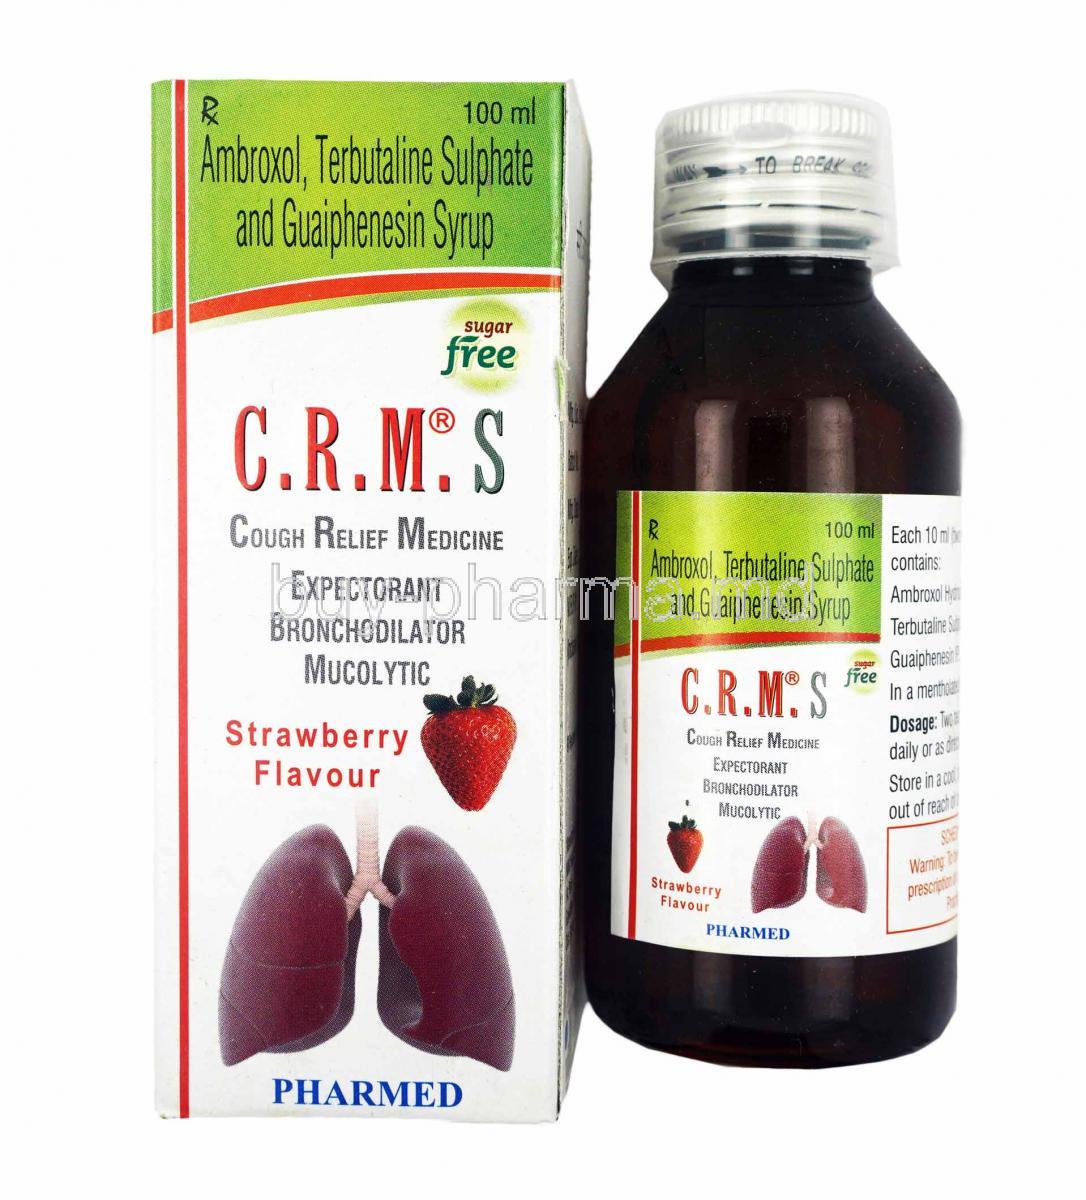 C.R.M.S Syrup Strawberry Flavour, Ambroxol, Guaifenesin and Terbutaline box and bottle